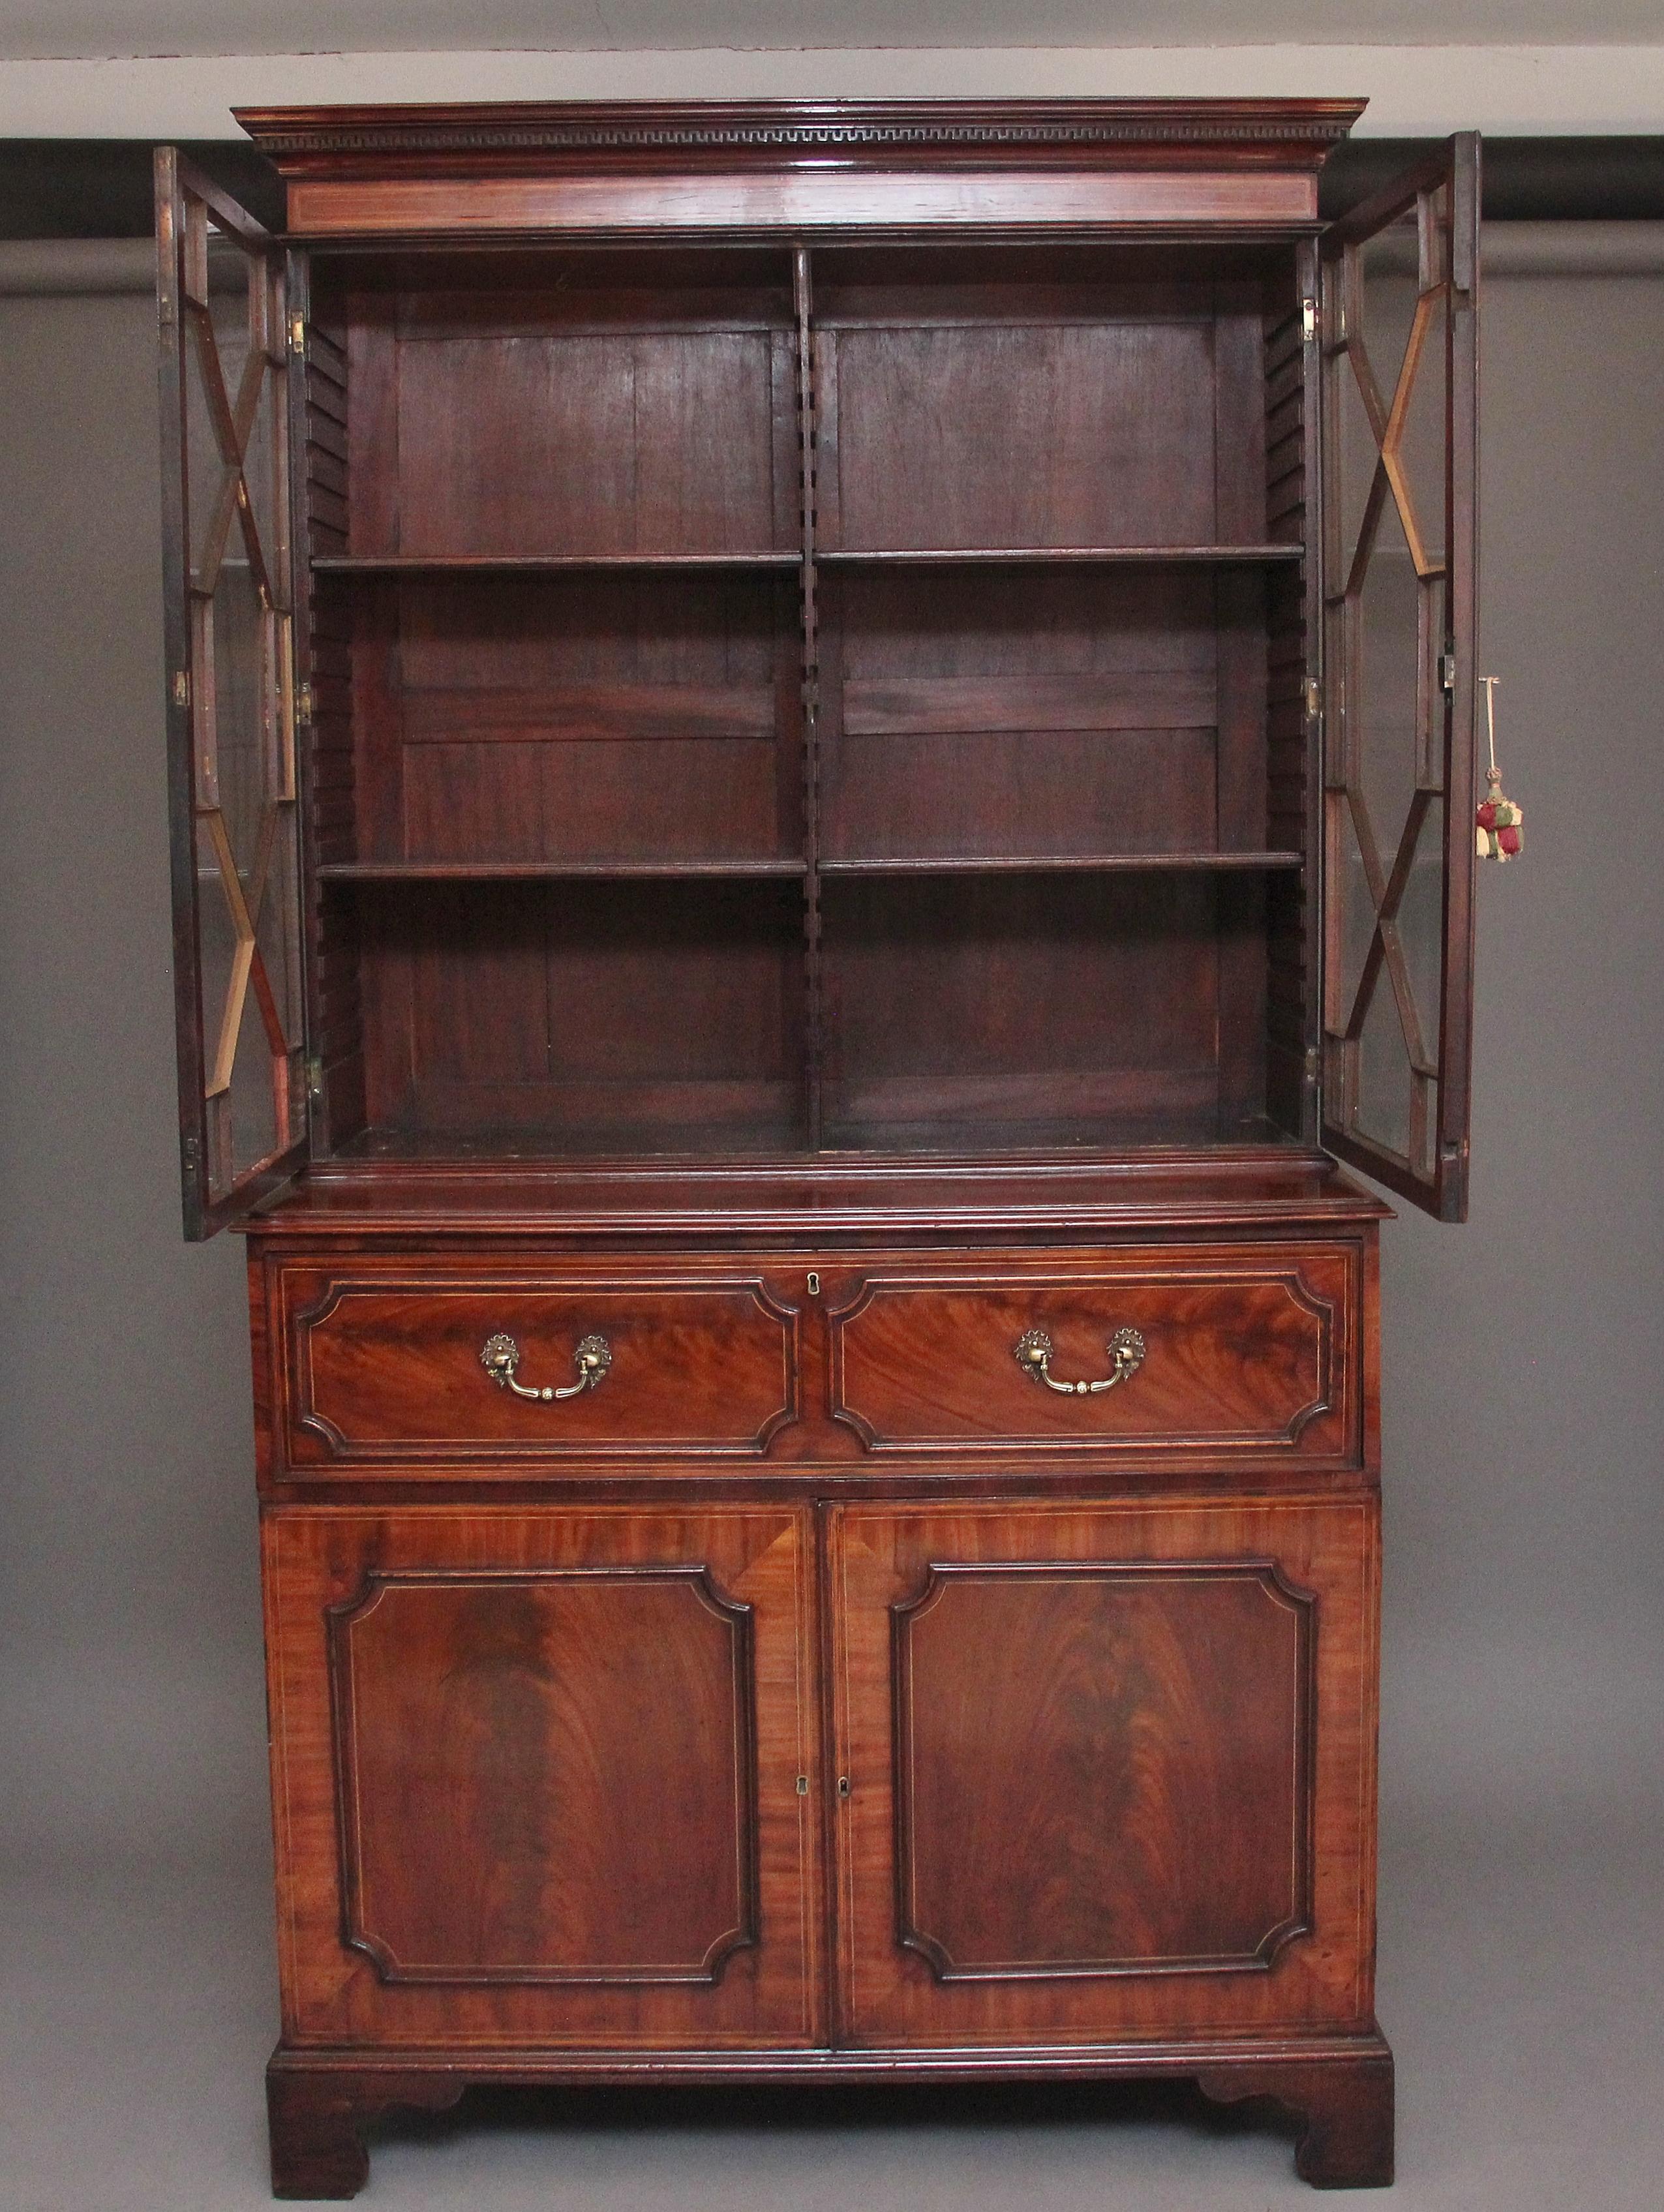 Early 19th century flame mahogany secretaire bookcase with a nice moulded cornice with dentil moulding, the bookcase having two astrigal glazed doors opening to reveal four adjustable shelves inside, the bottom section having a pull out secretaire